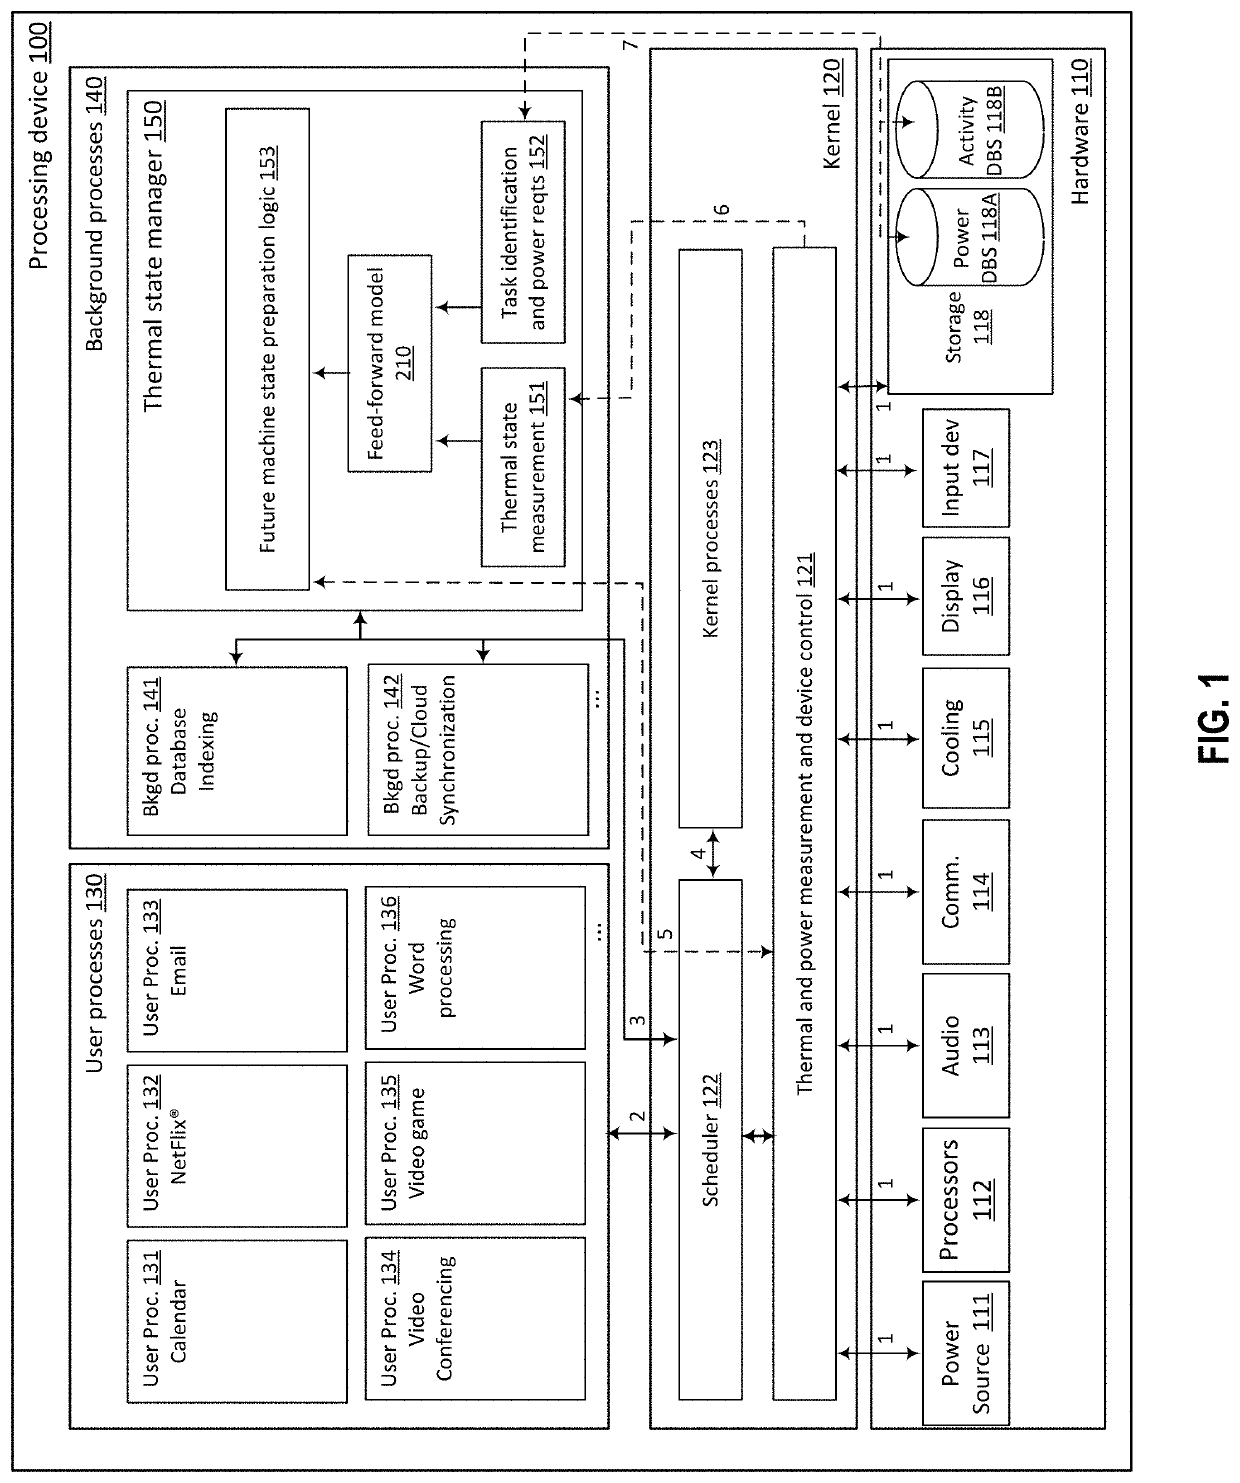 Predictive control systems and methods